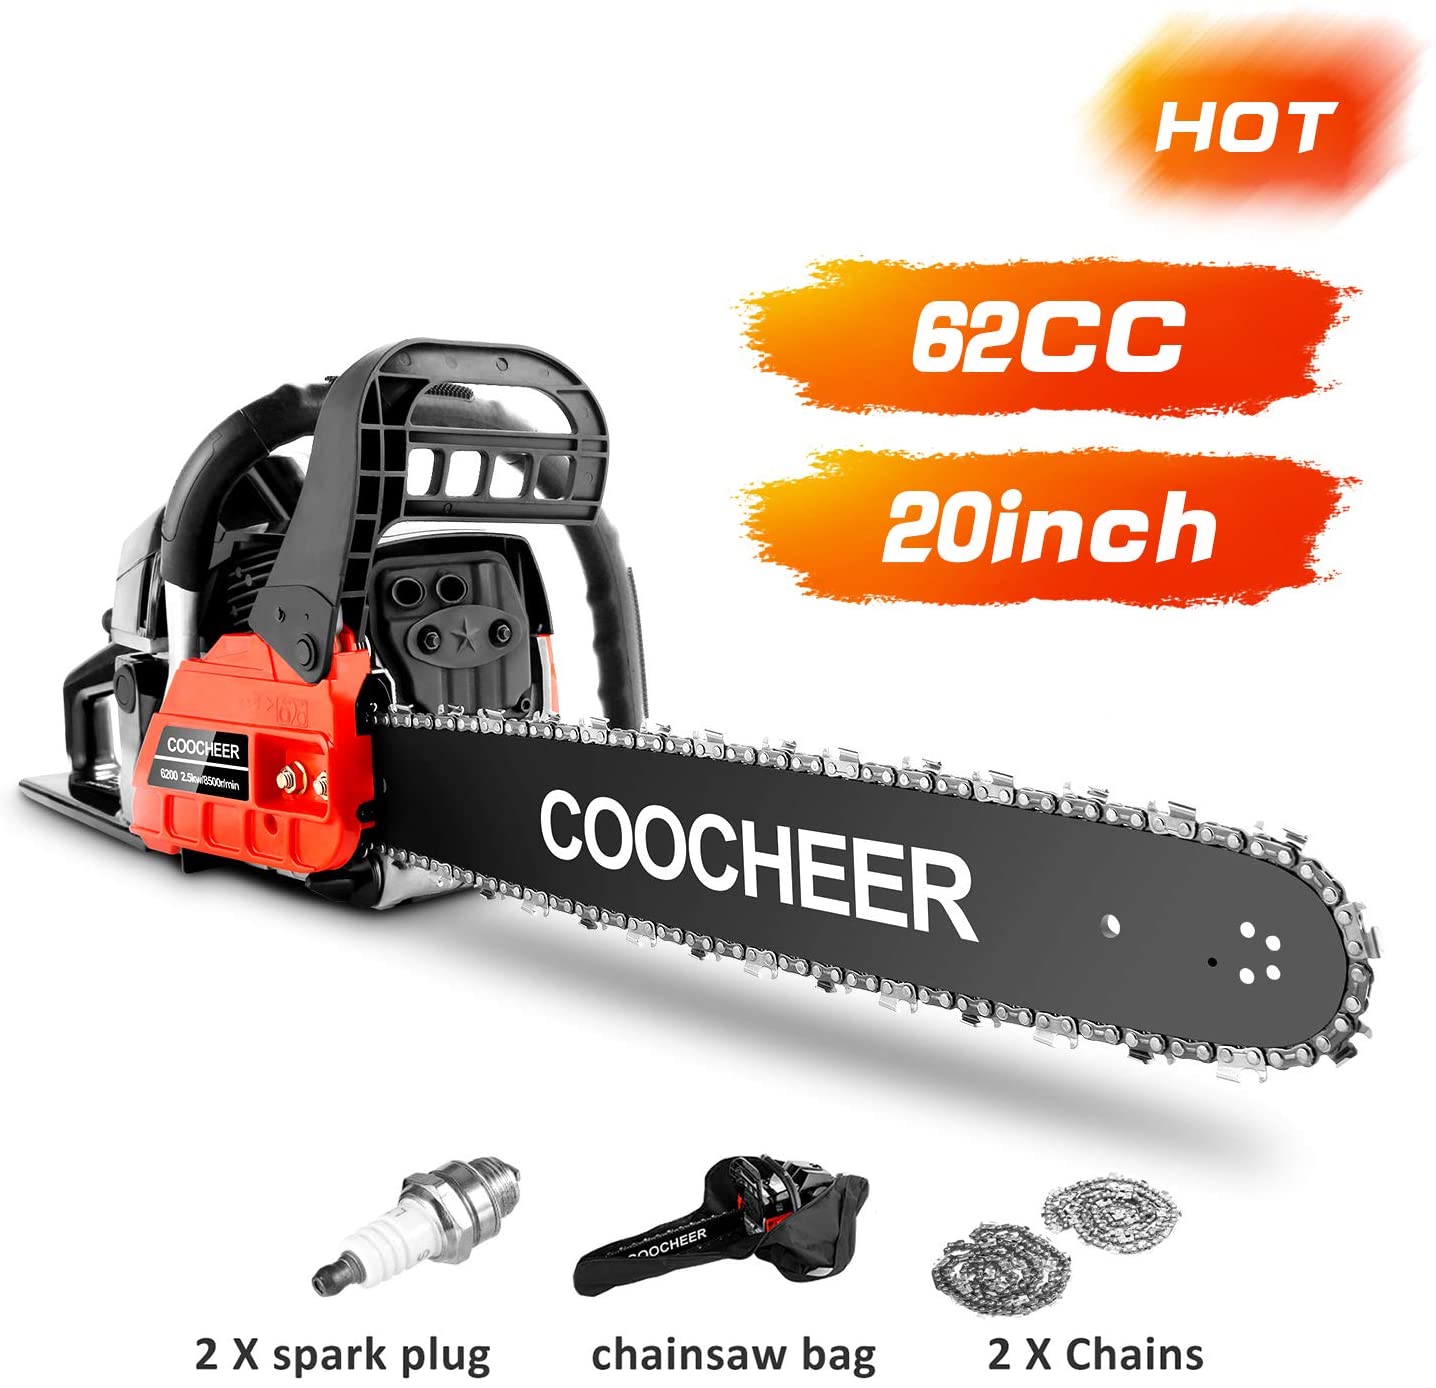 COOCHEER 20-inch Gas-powered Chainsaw